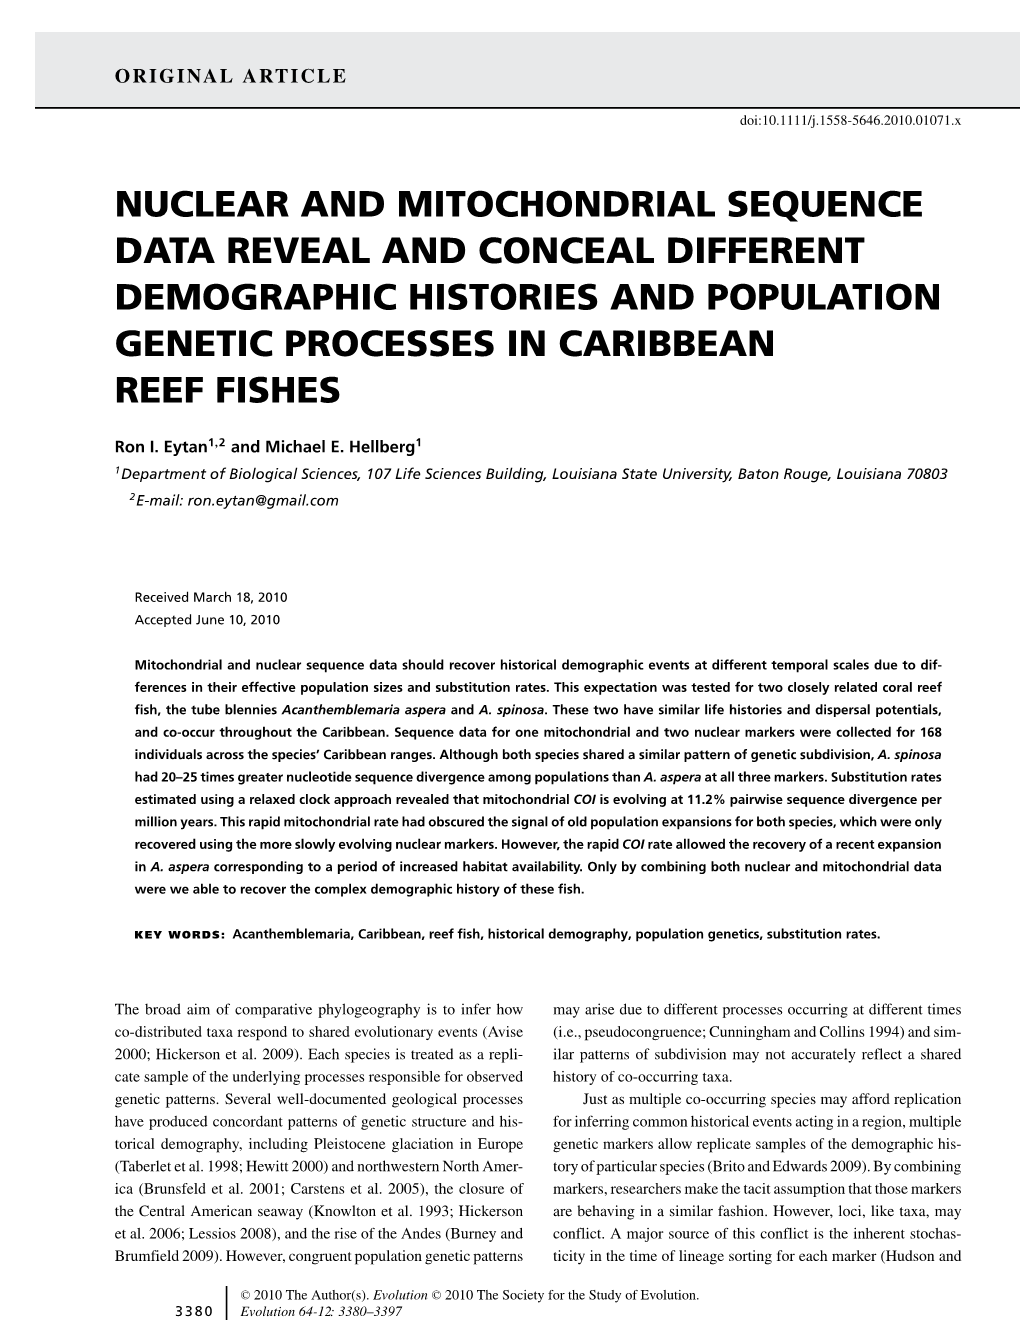 Nuclear and Mitochondrial Sequence Data Reveal and Conceal Different Demographic Histories and Population Genetic Processes in Caribbean Reef Fishes